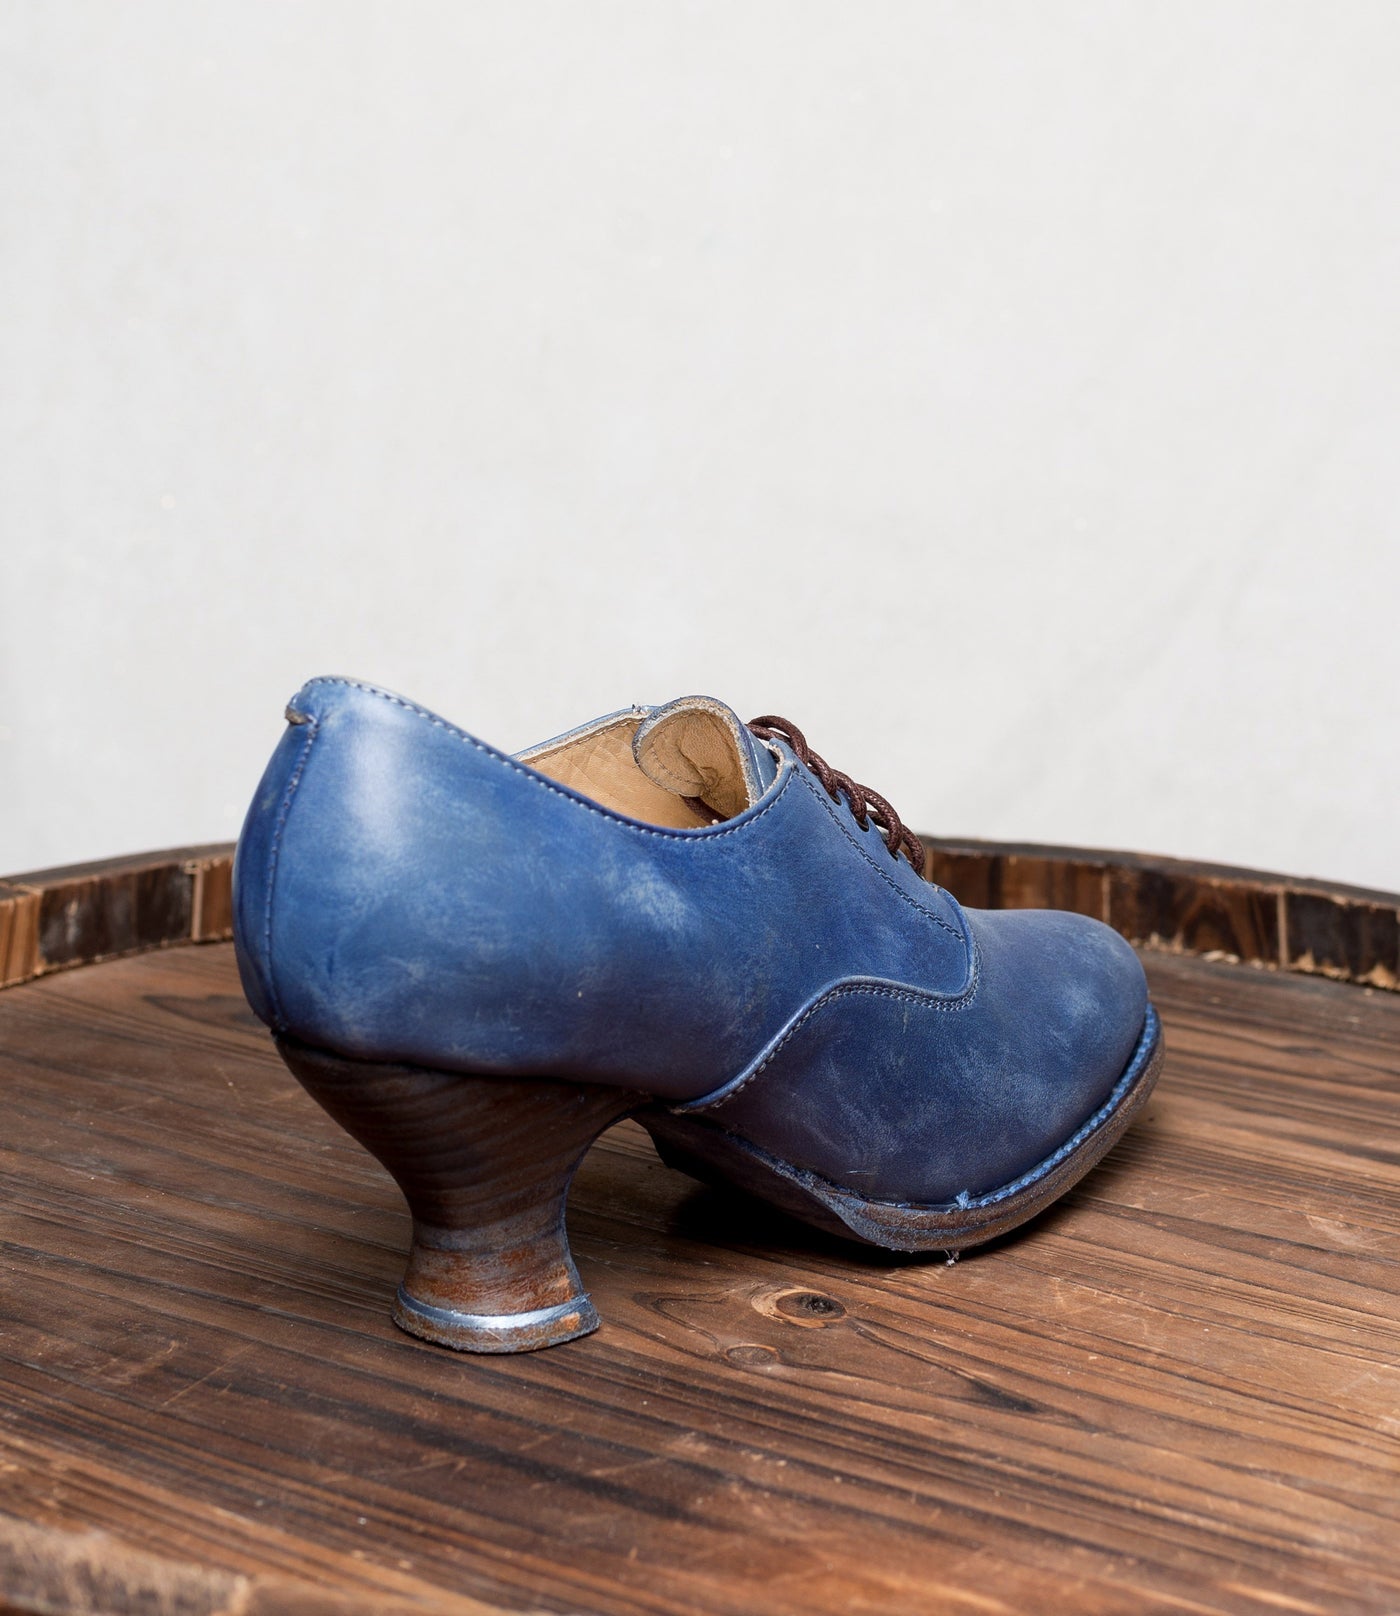 Janet Victorian Style Shoes in Steel Blue